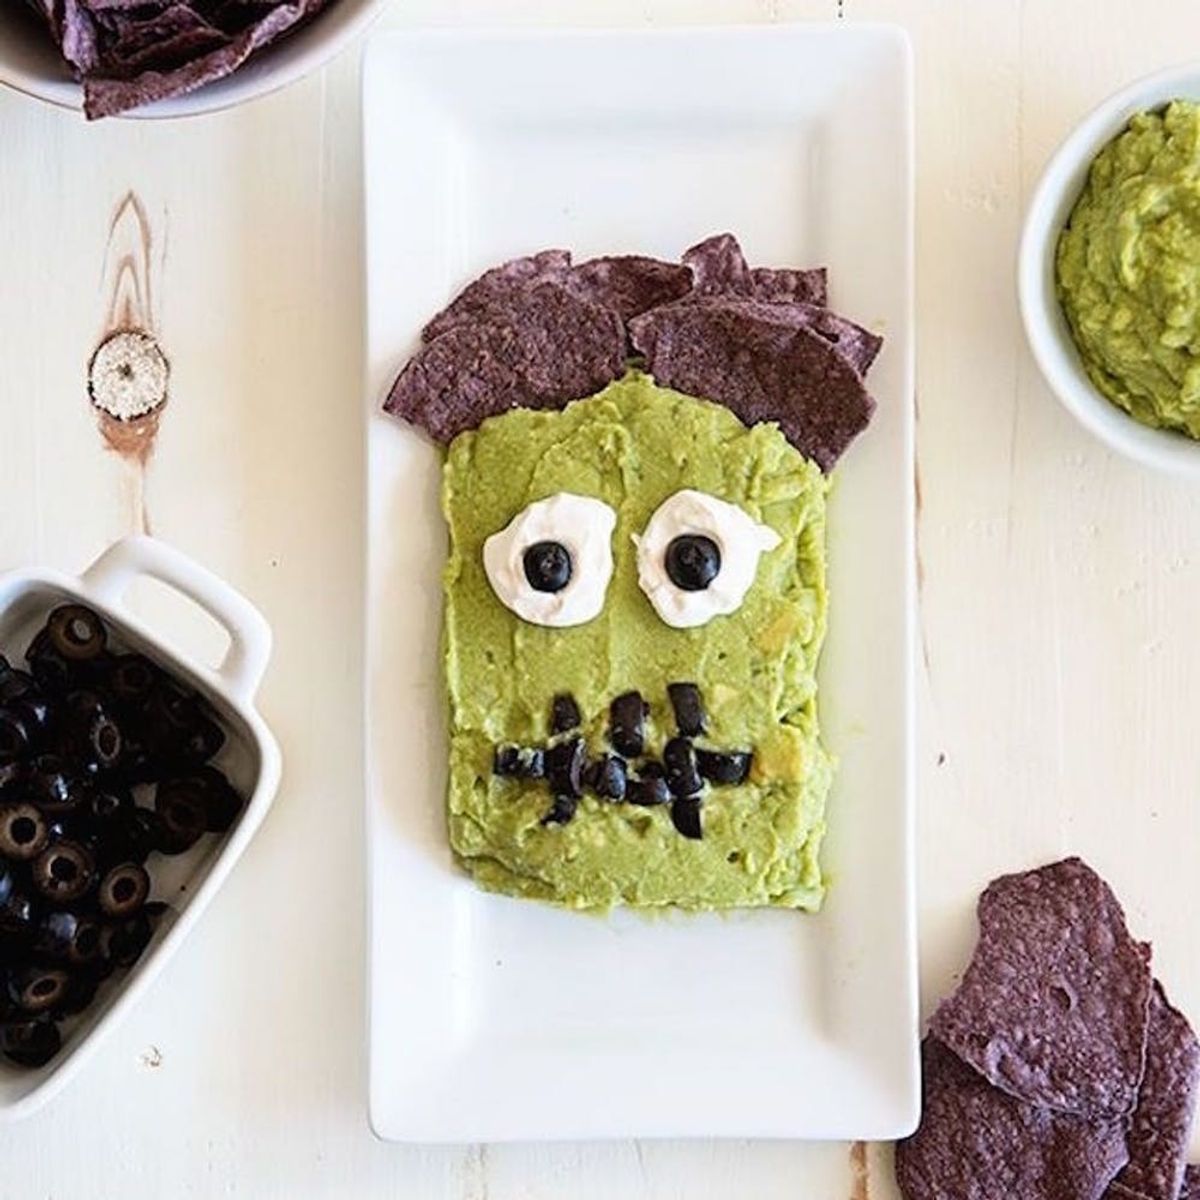 8 Halloween Appetizers That Will Make Your Guests Batty